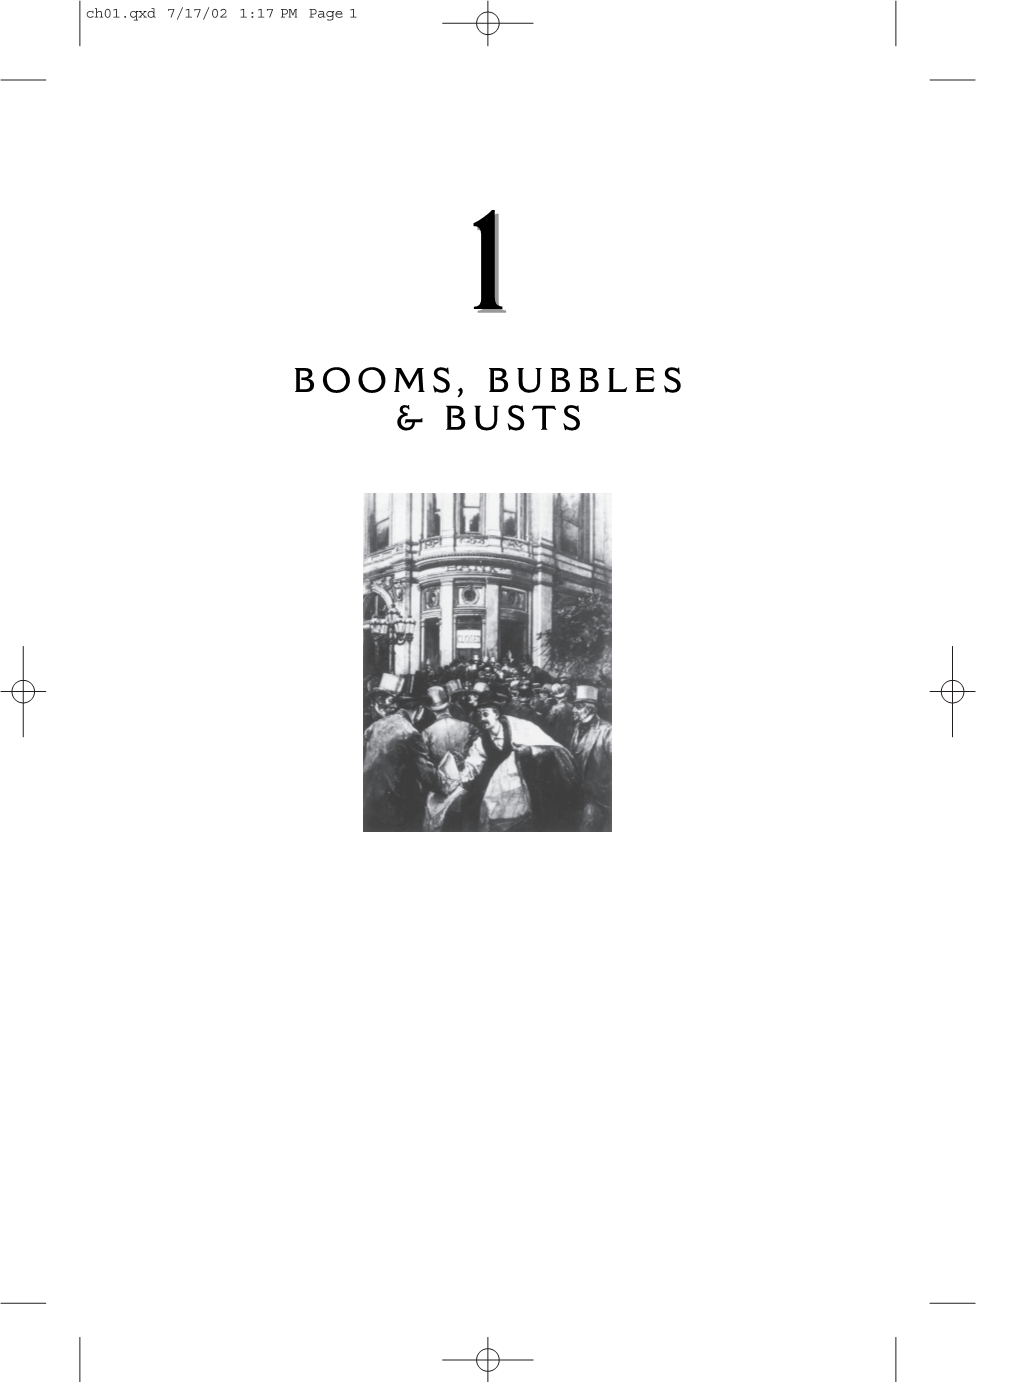 Booms, Bubbles & Busts